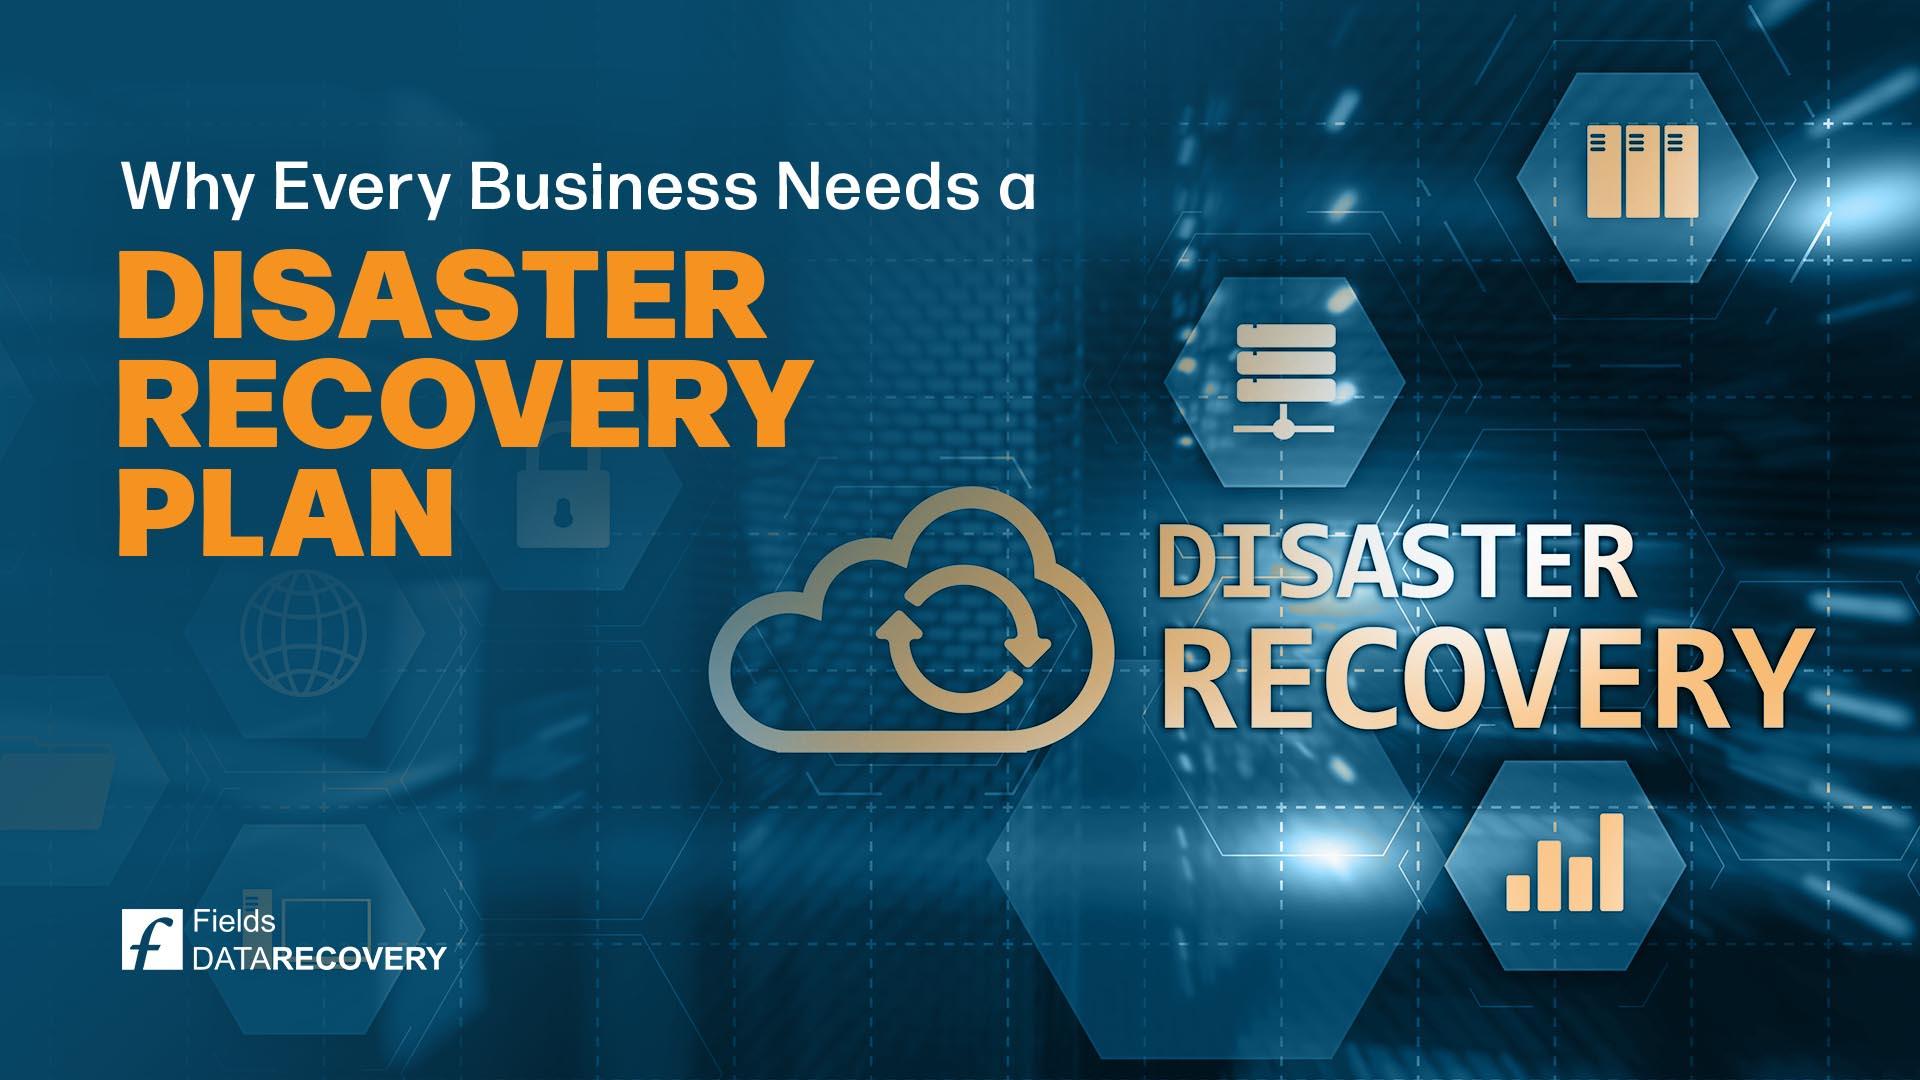 Why Every Business Needs a Disaster Recovery Plan